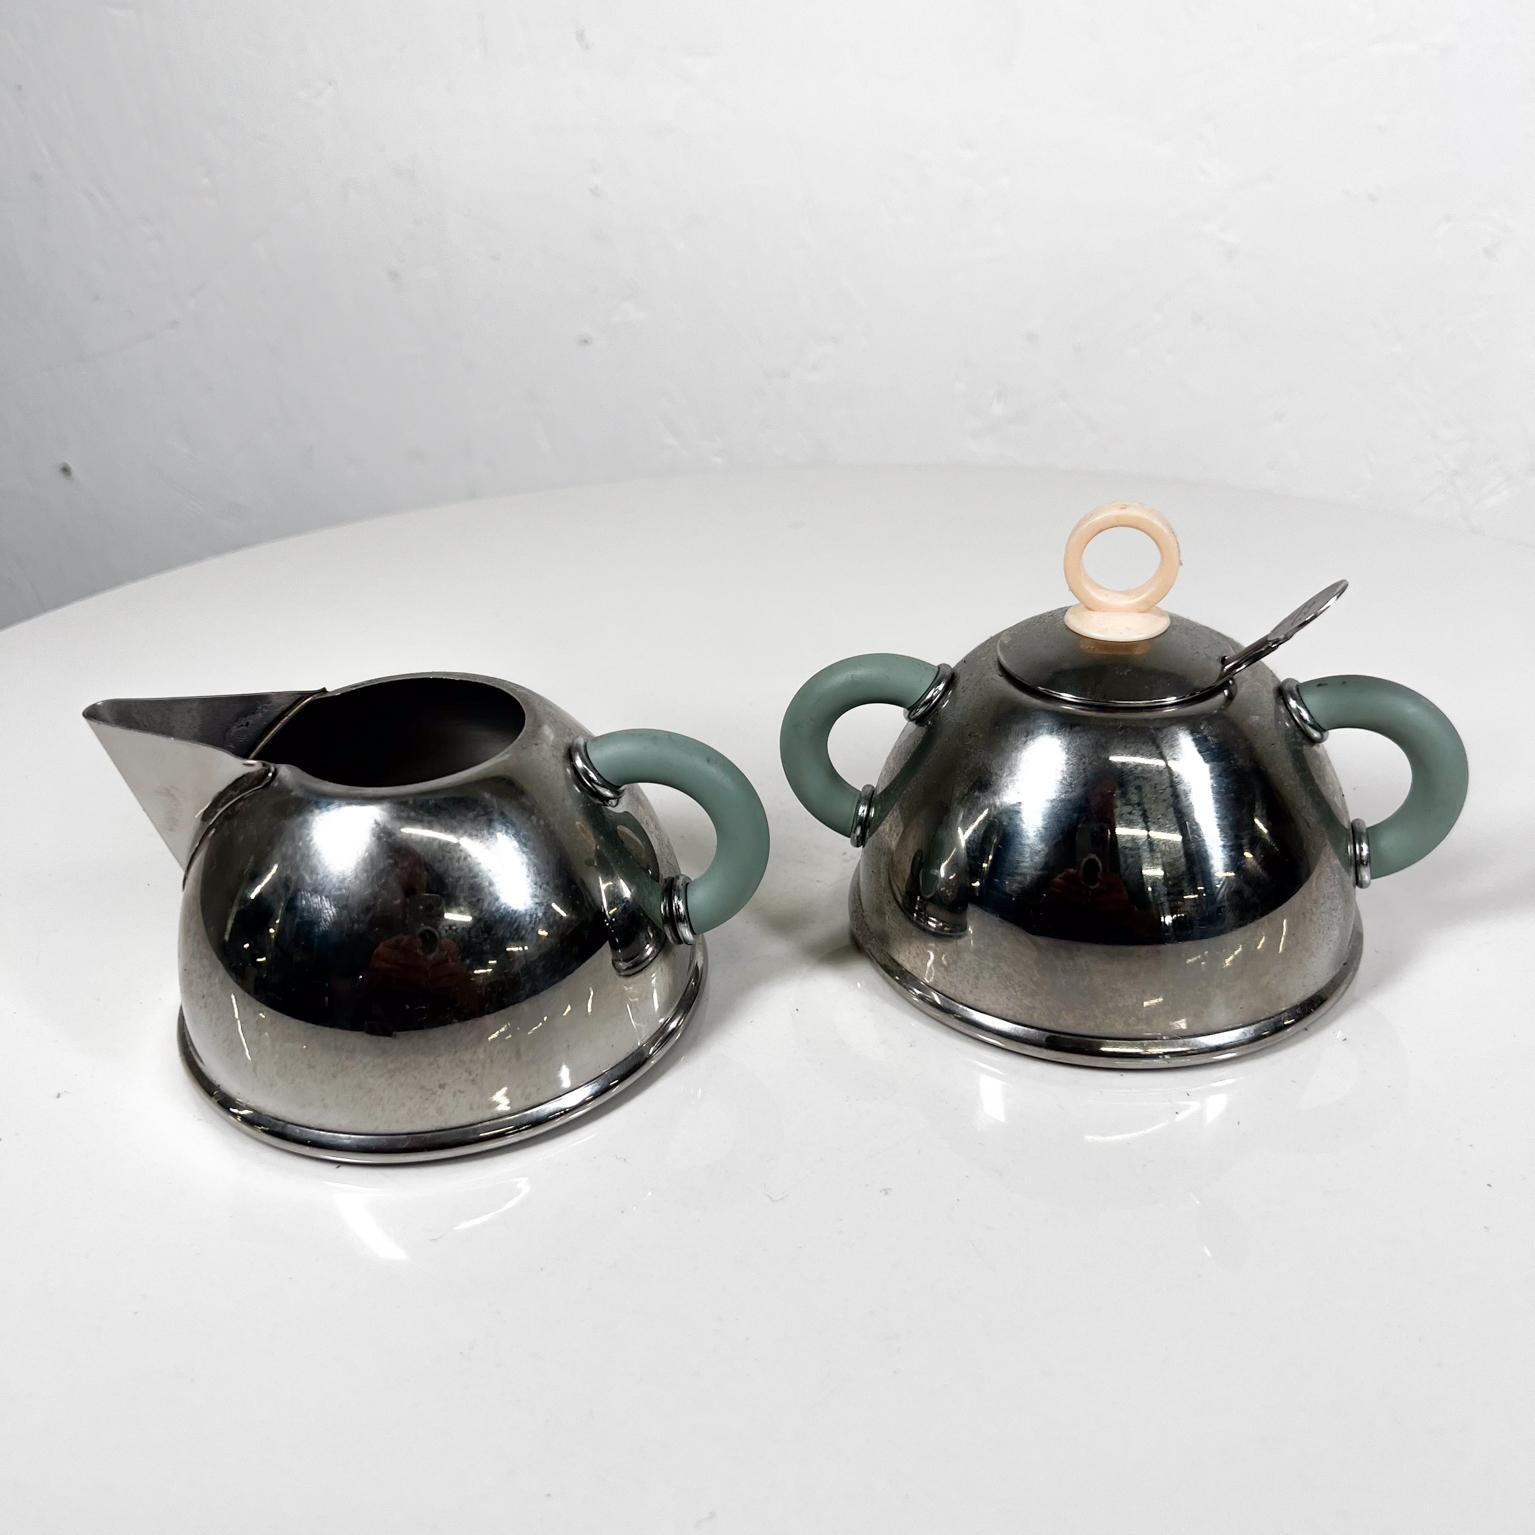 1985 Iconic Alessi sugar bowl and creamer designed by Michael Graves.
Made Taiwan
Stainless Steel
Creamer 5 x 4 w x 2.5 h
Sugar 5 x 4 x 3.63 h
Original sugar spoon is included. 
Preowned original vintage condition
Refer to images please.